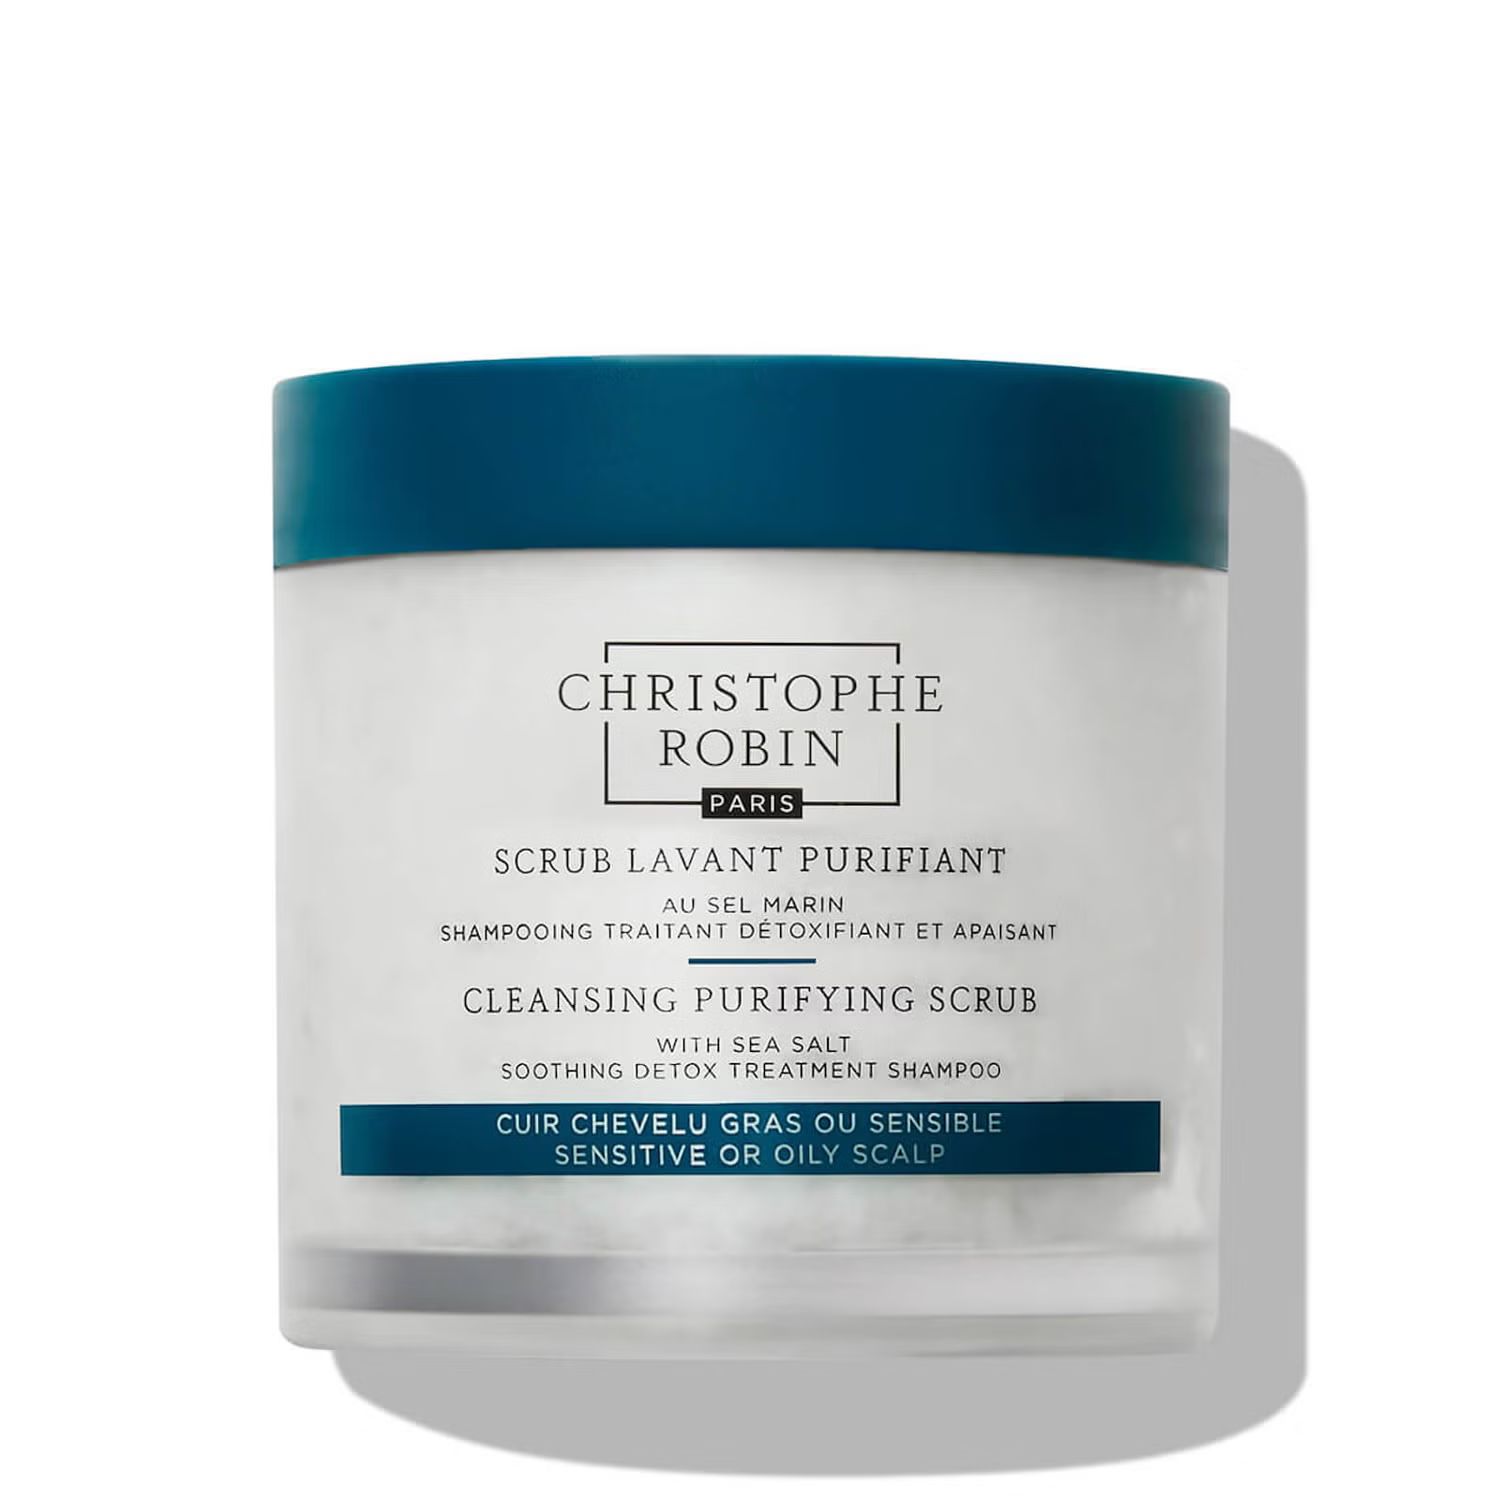 Christophe Robin Cleansing Purifying Scrub with Sea Salt 250ml | Dermstore (US)